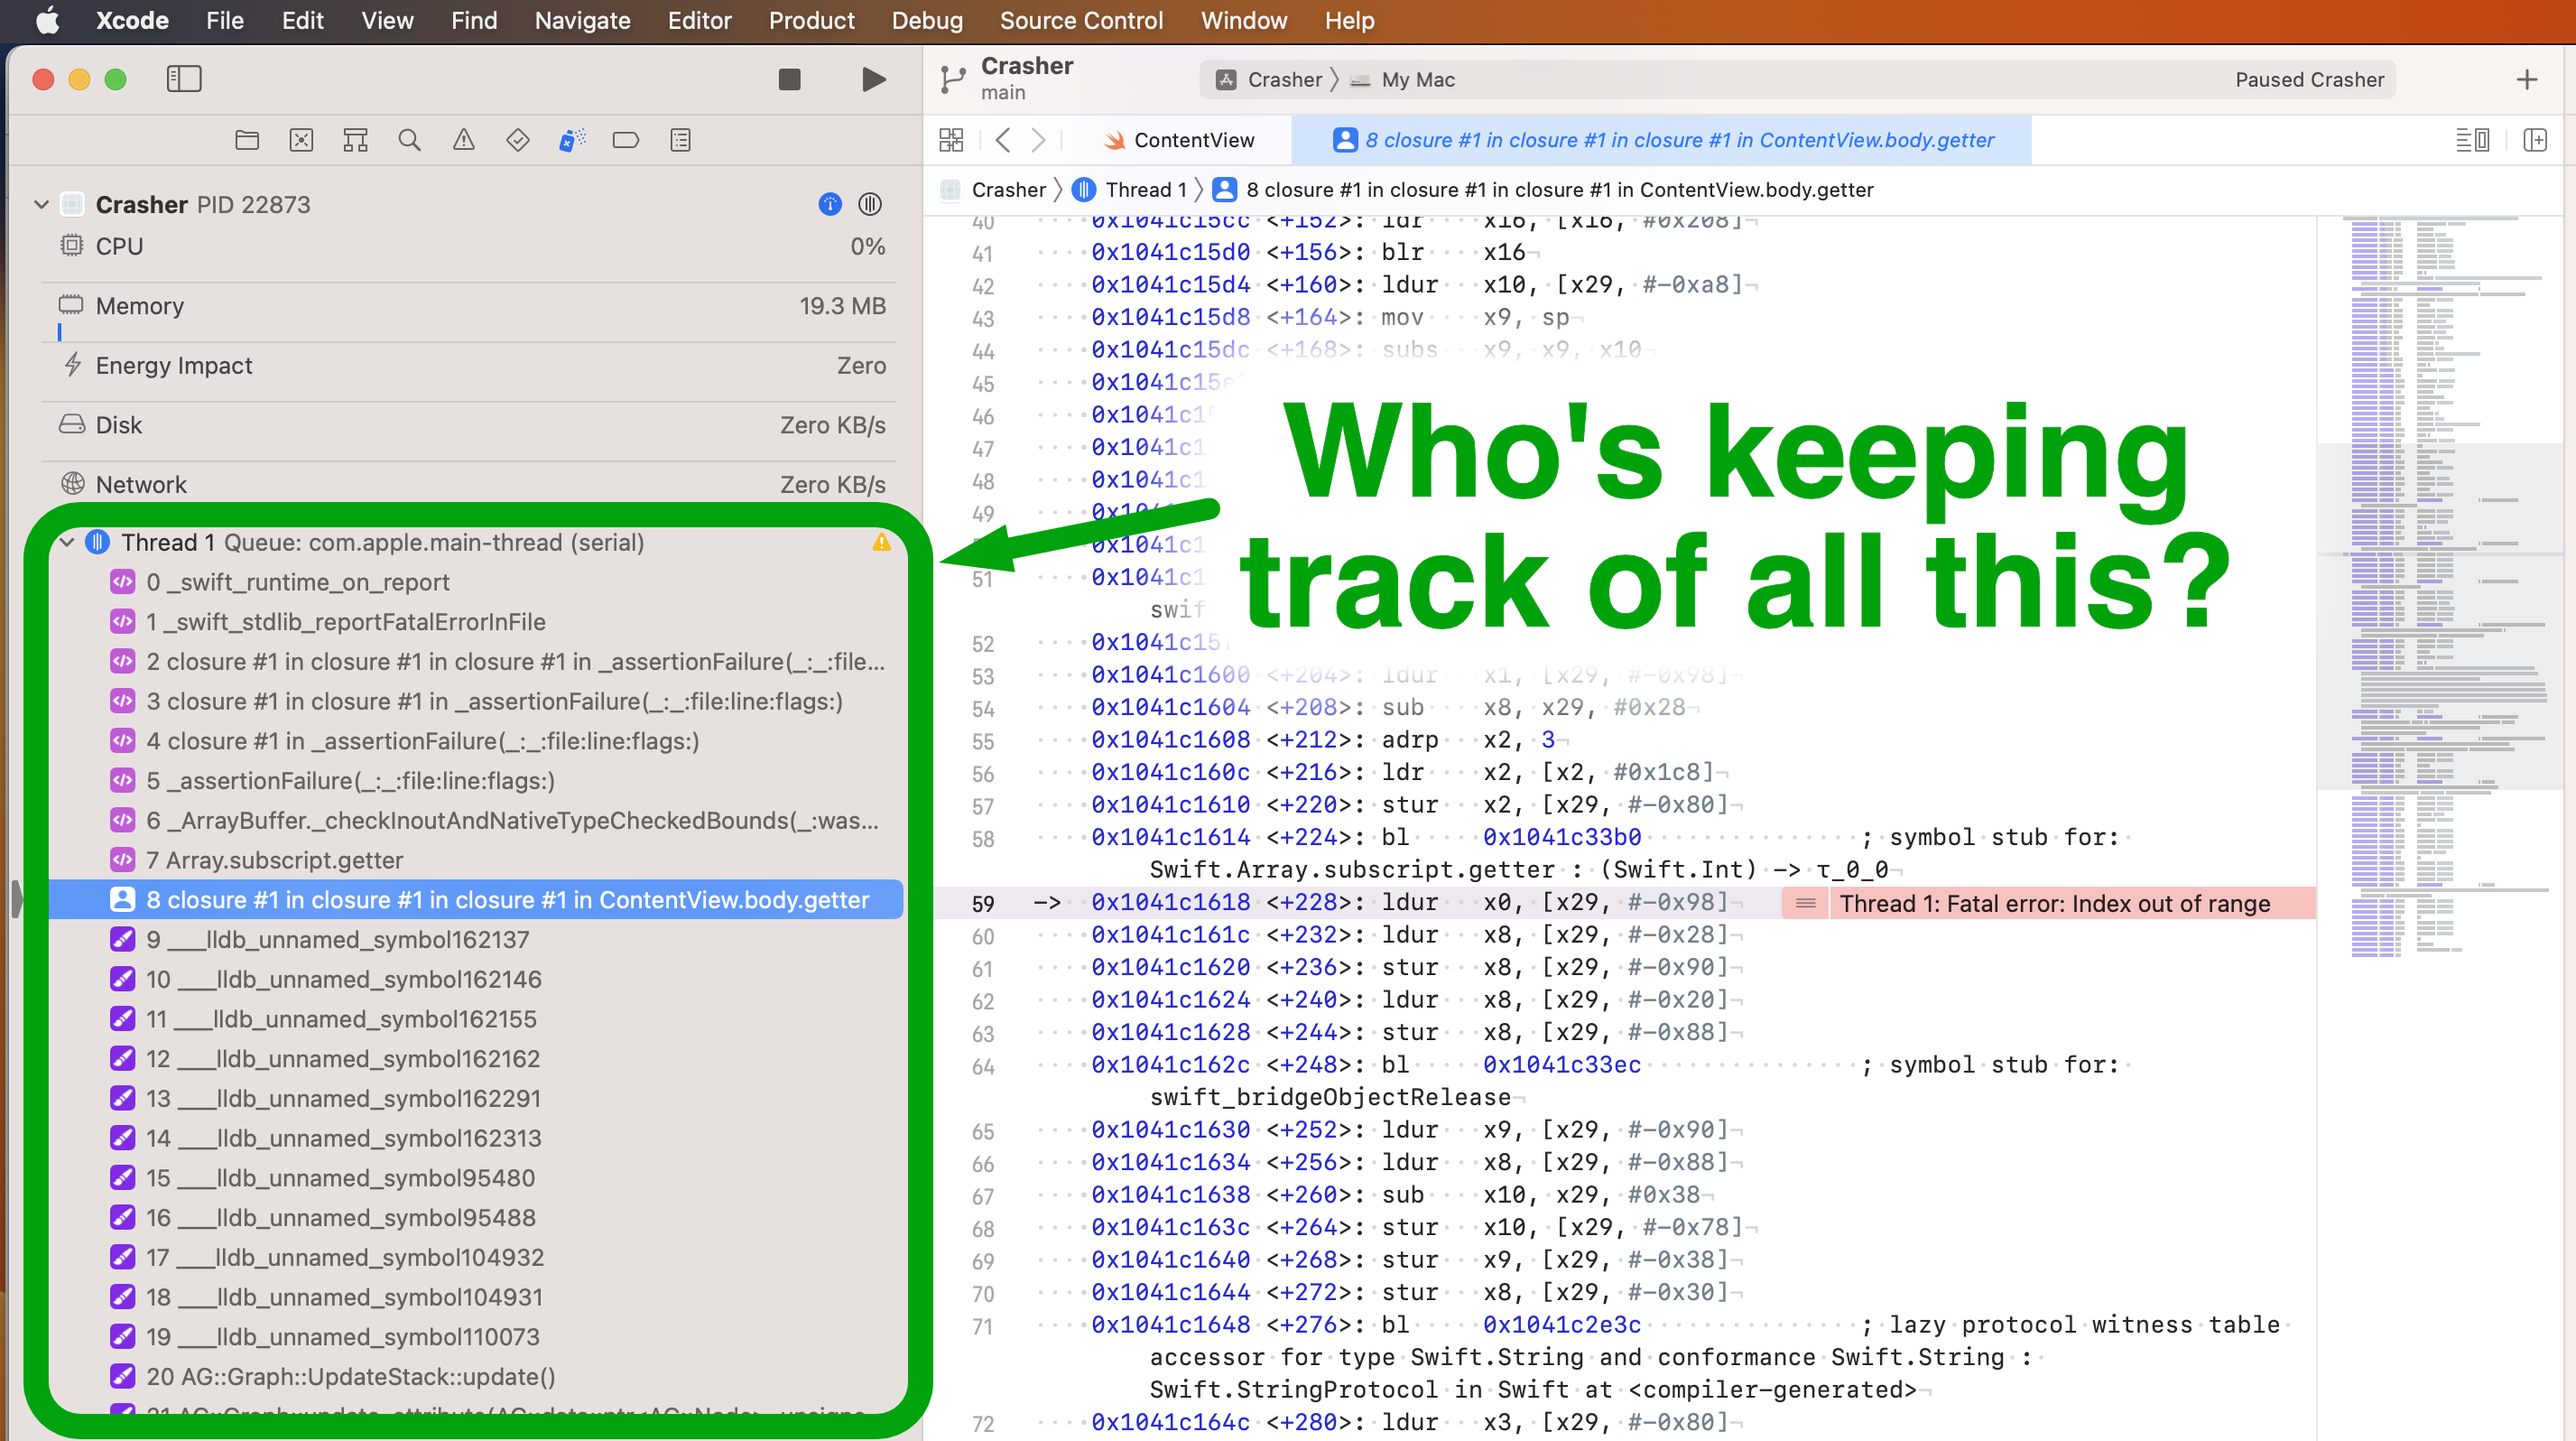 Screenshot of Xcode stopped in the debugger at a crash due to an "index out of range" assertion failure. The text "Who's keeping track of all this?" has been edited into the screenshot, with an arrow indicating that "all this" is the stack trace in Xcode's debug navigator.